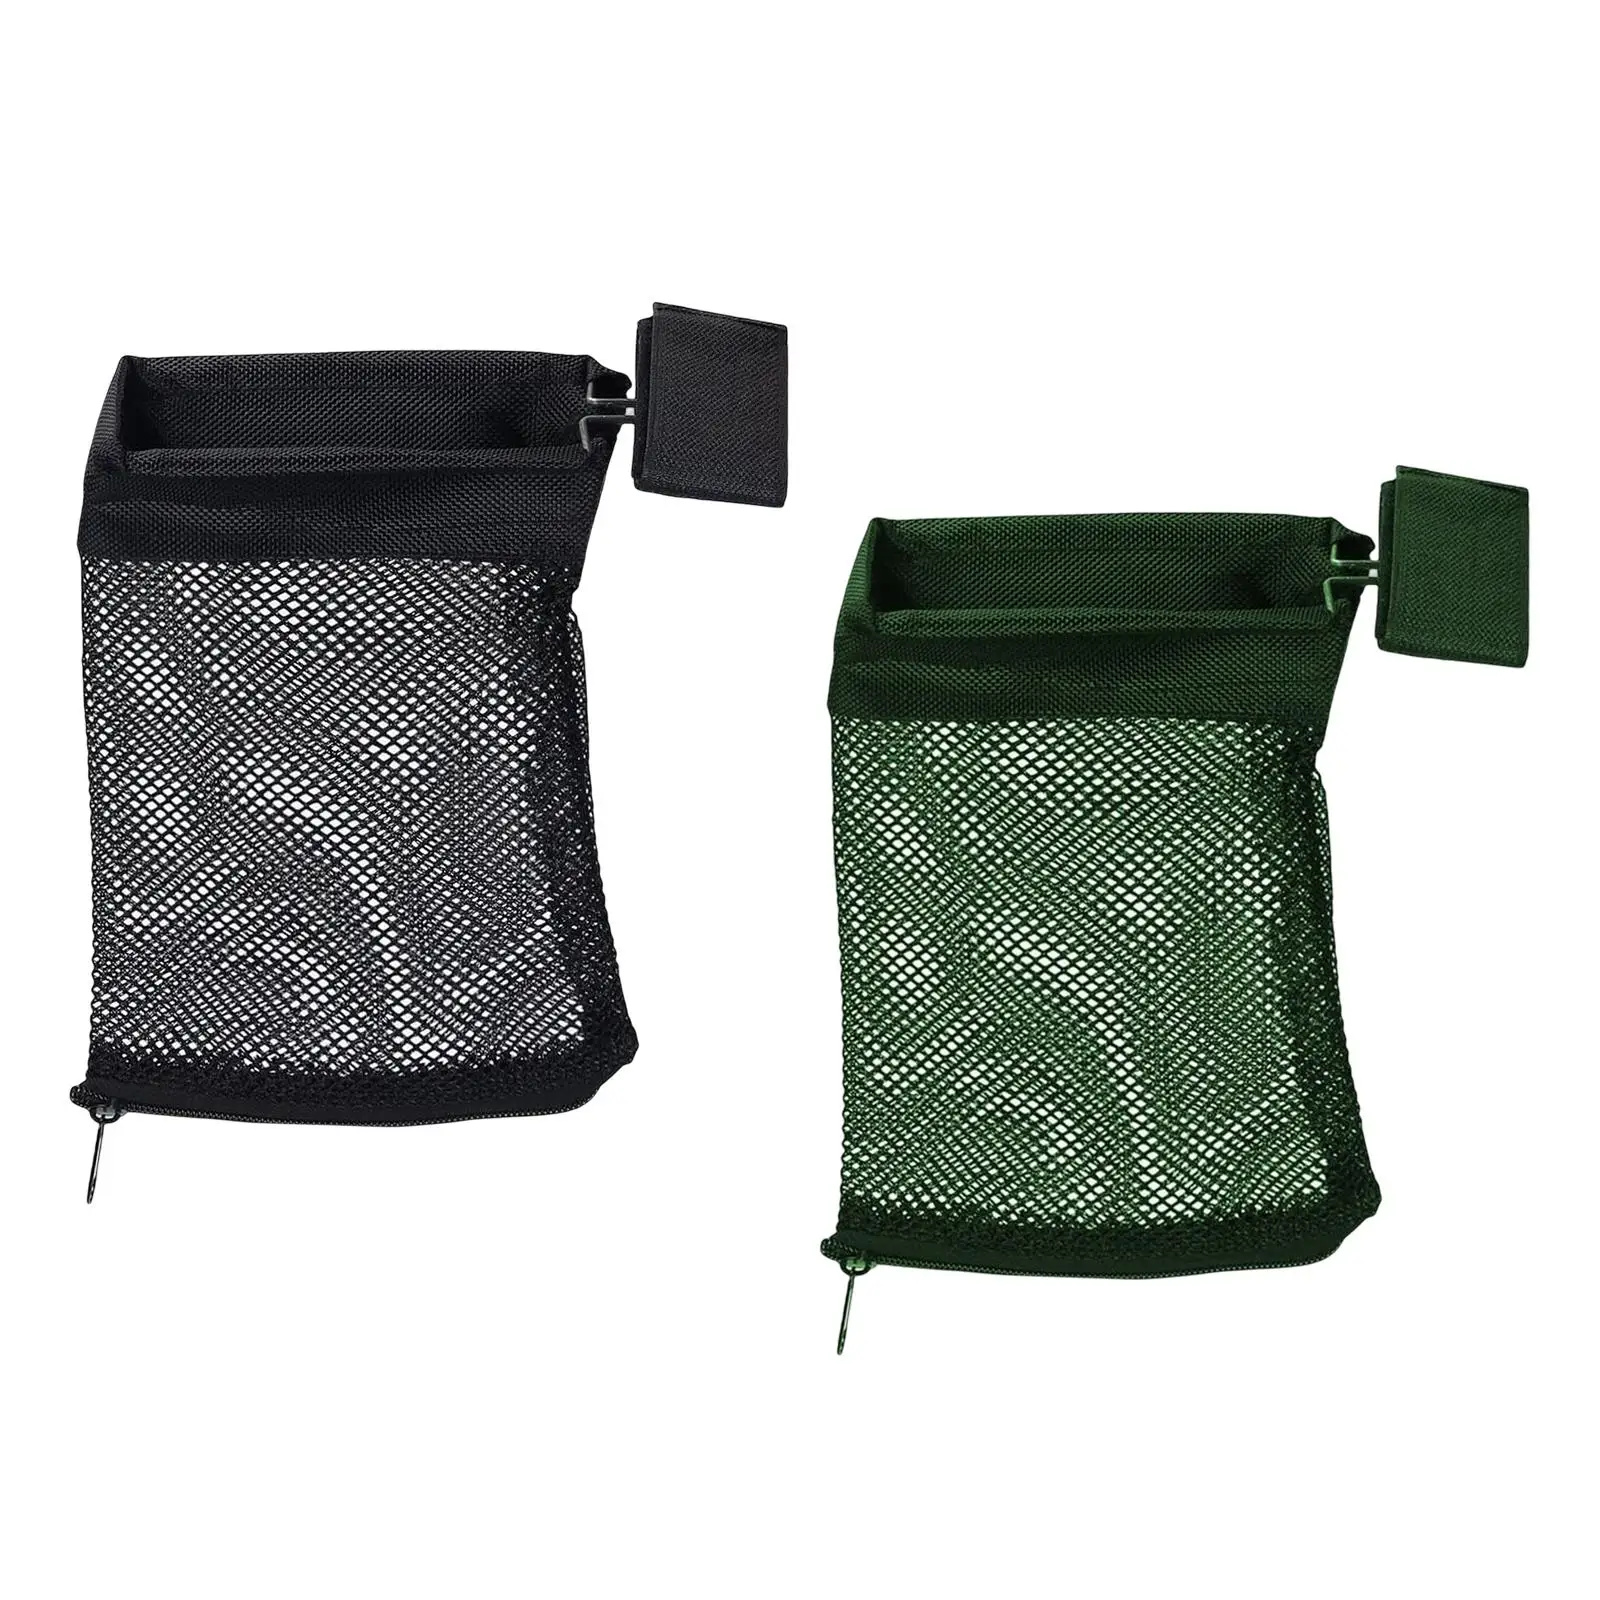 

Mesh Recycling Bag Makeup Pouch Holder Collector Organizer Lightweight Portable Storage Bags for Camp Hiking Indoor Travel Home